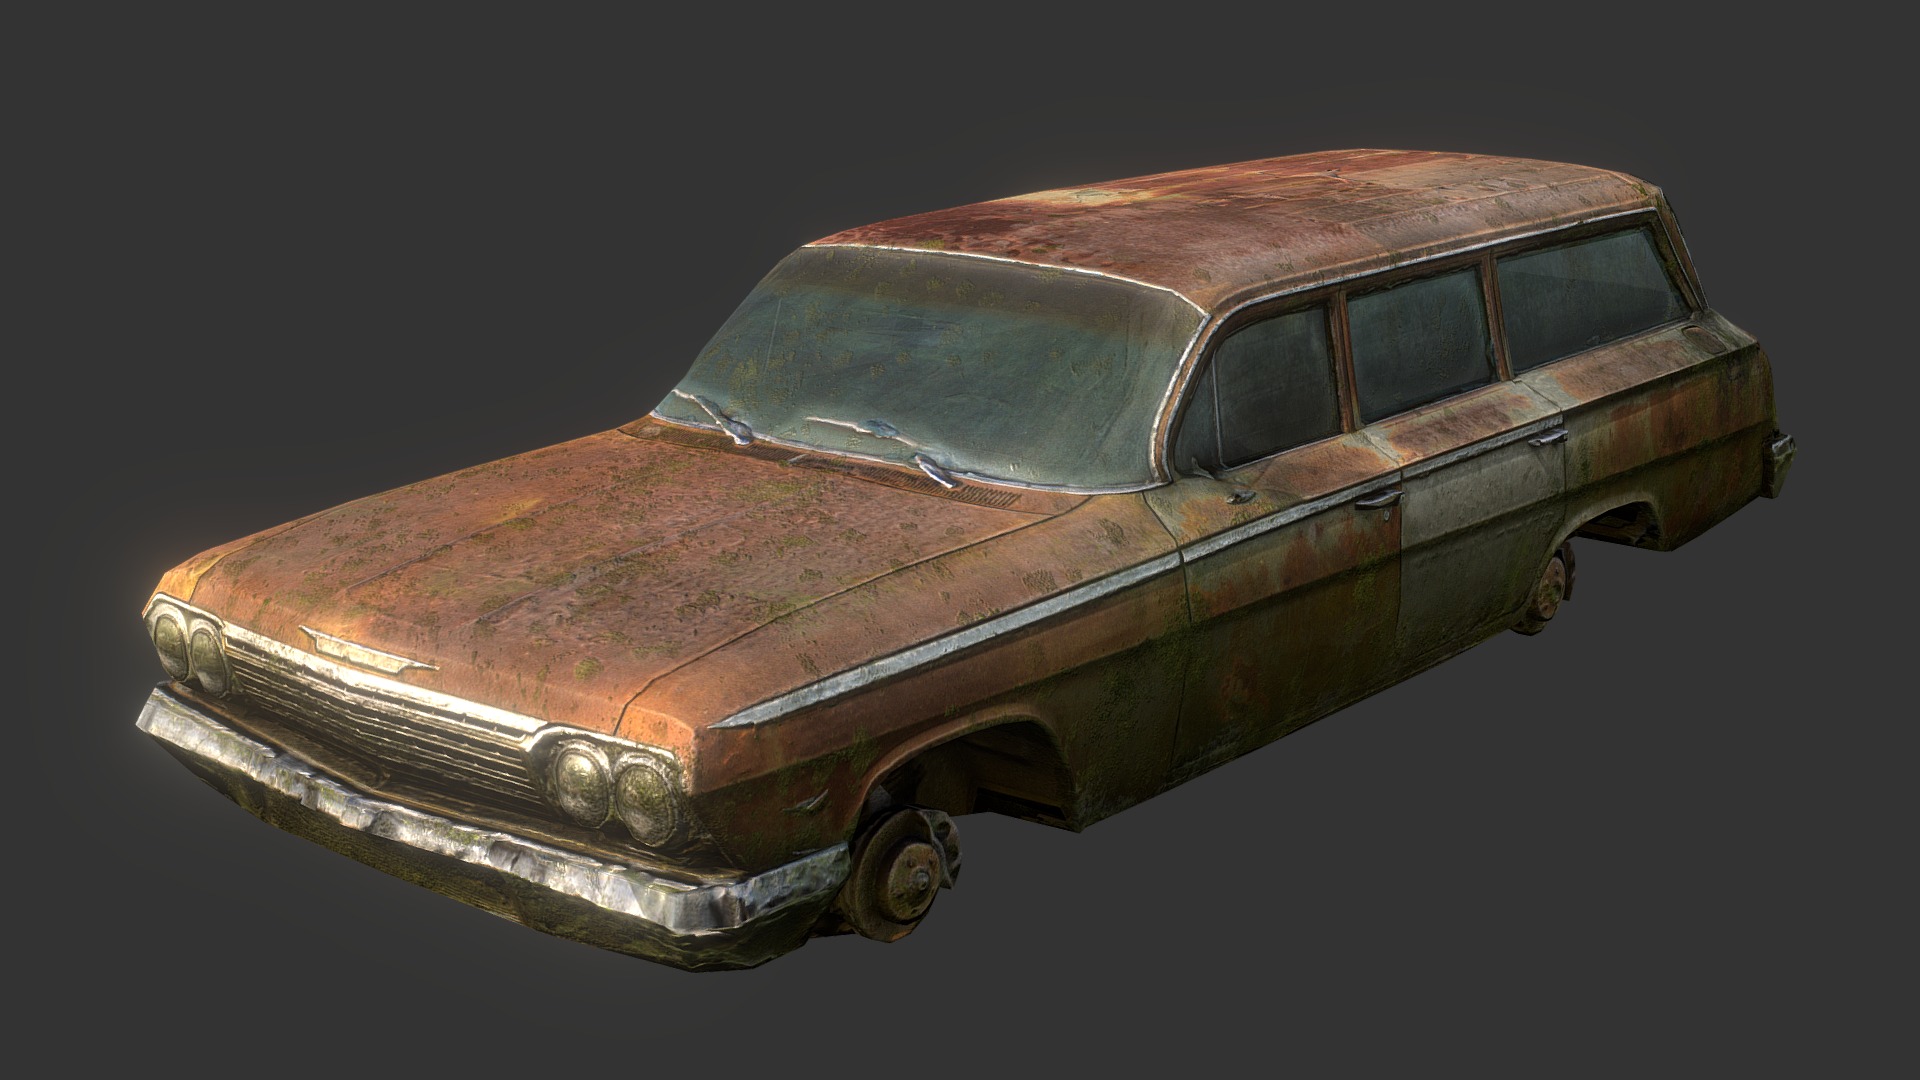 3D model Rusty Wagon Scan Thing - This is a 3D model of the Rusty Wagon Scan Thing. The 3D model is about a brown car with a black background.